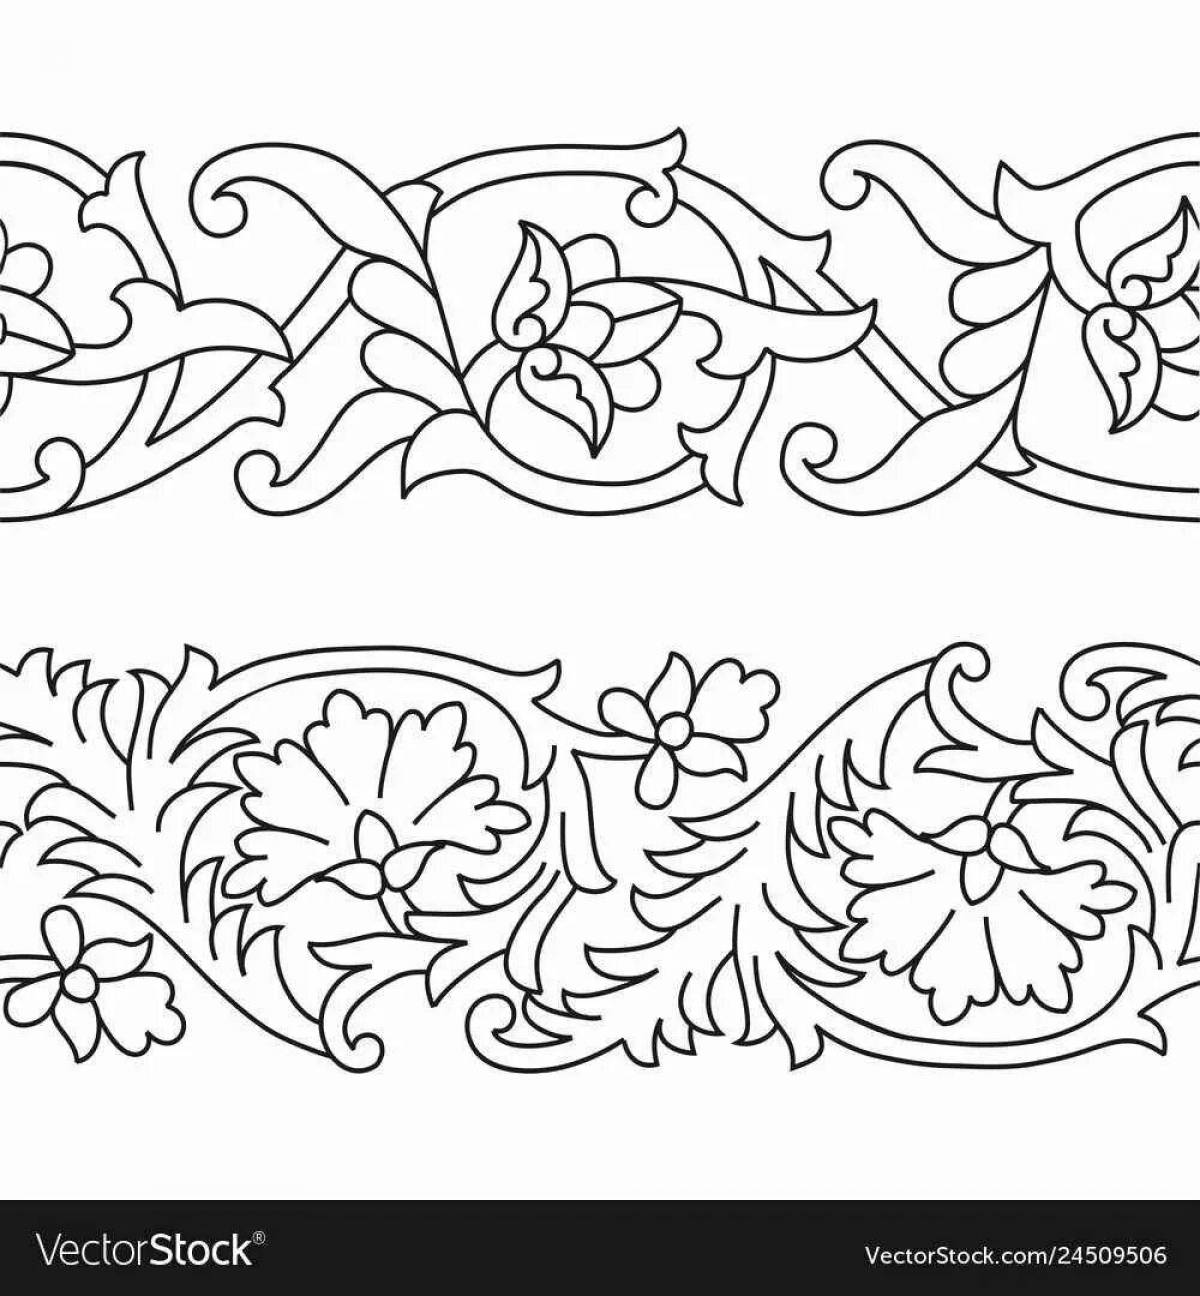 Coloring page unusual flower ornament